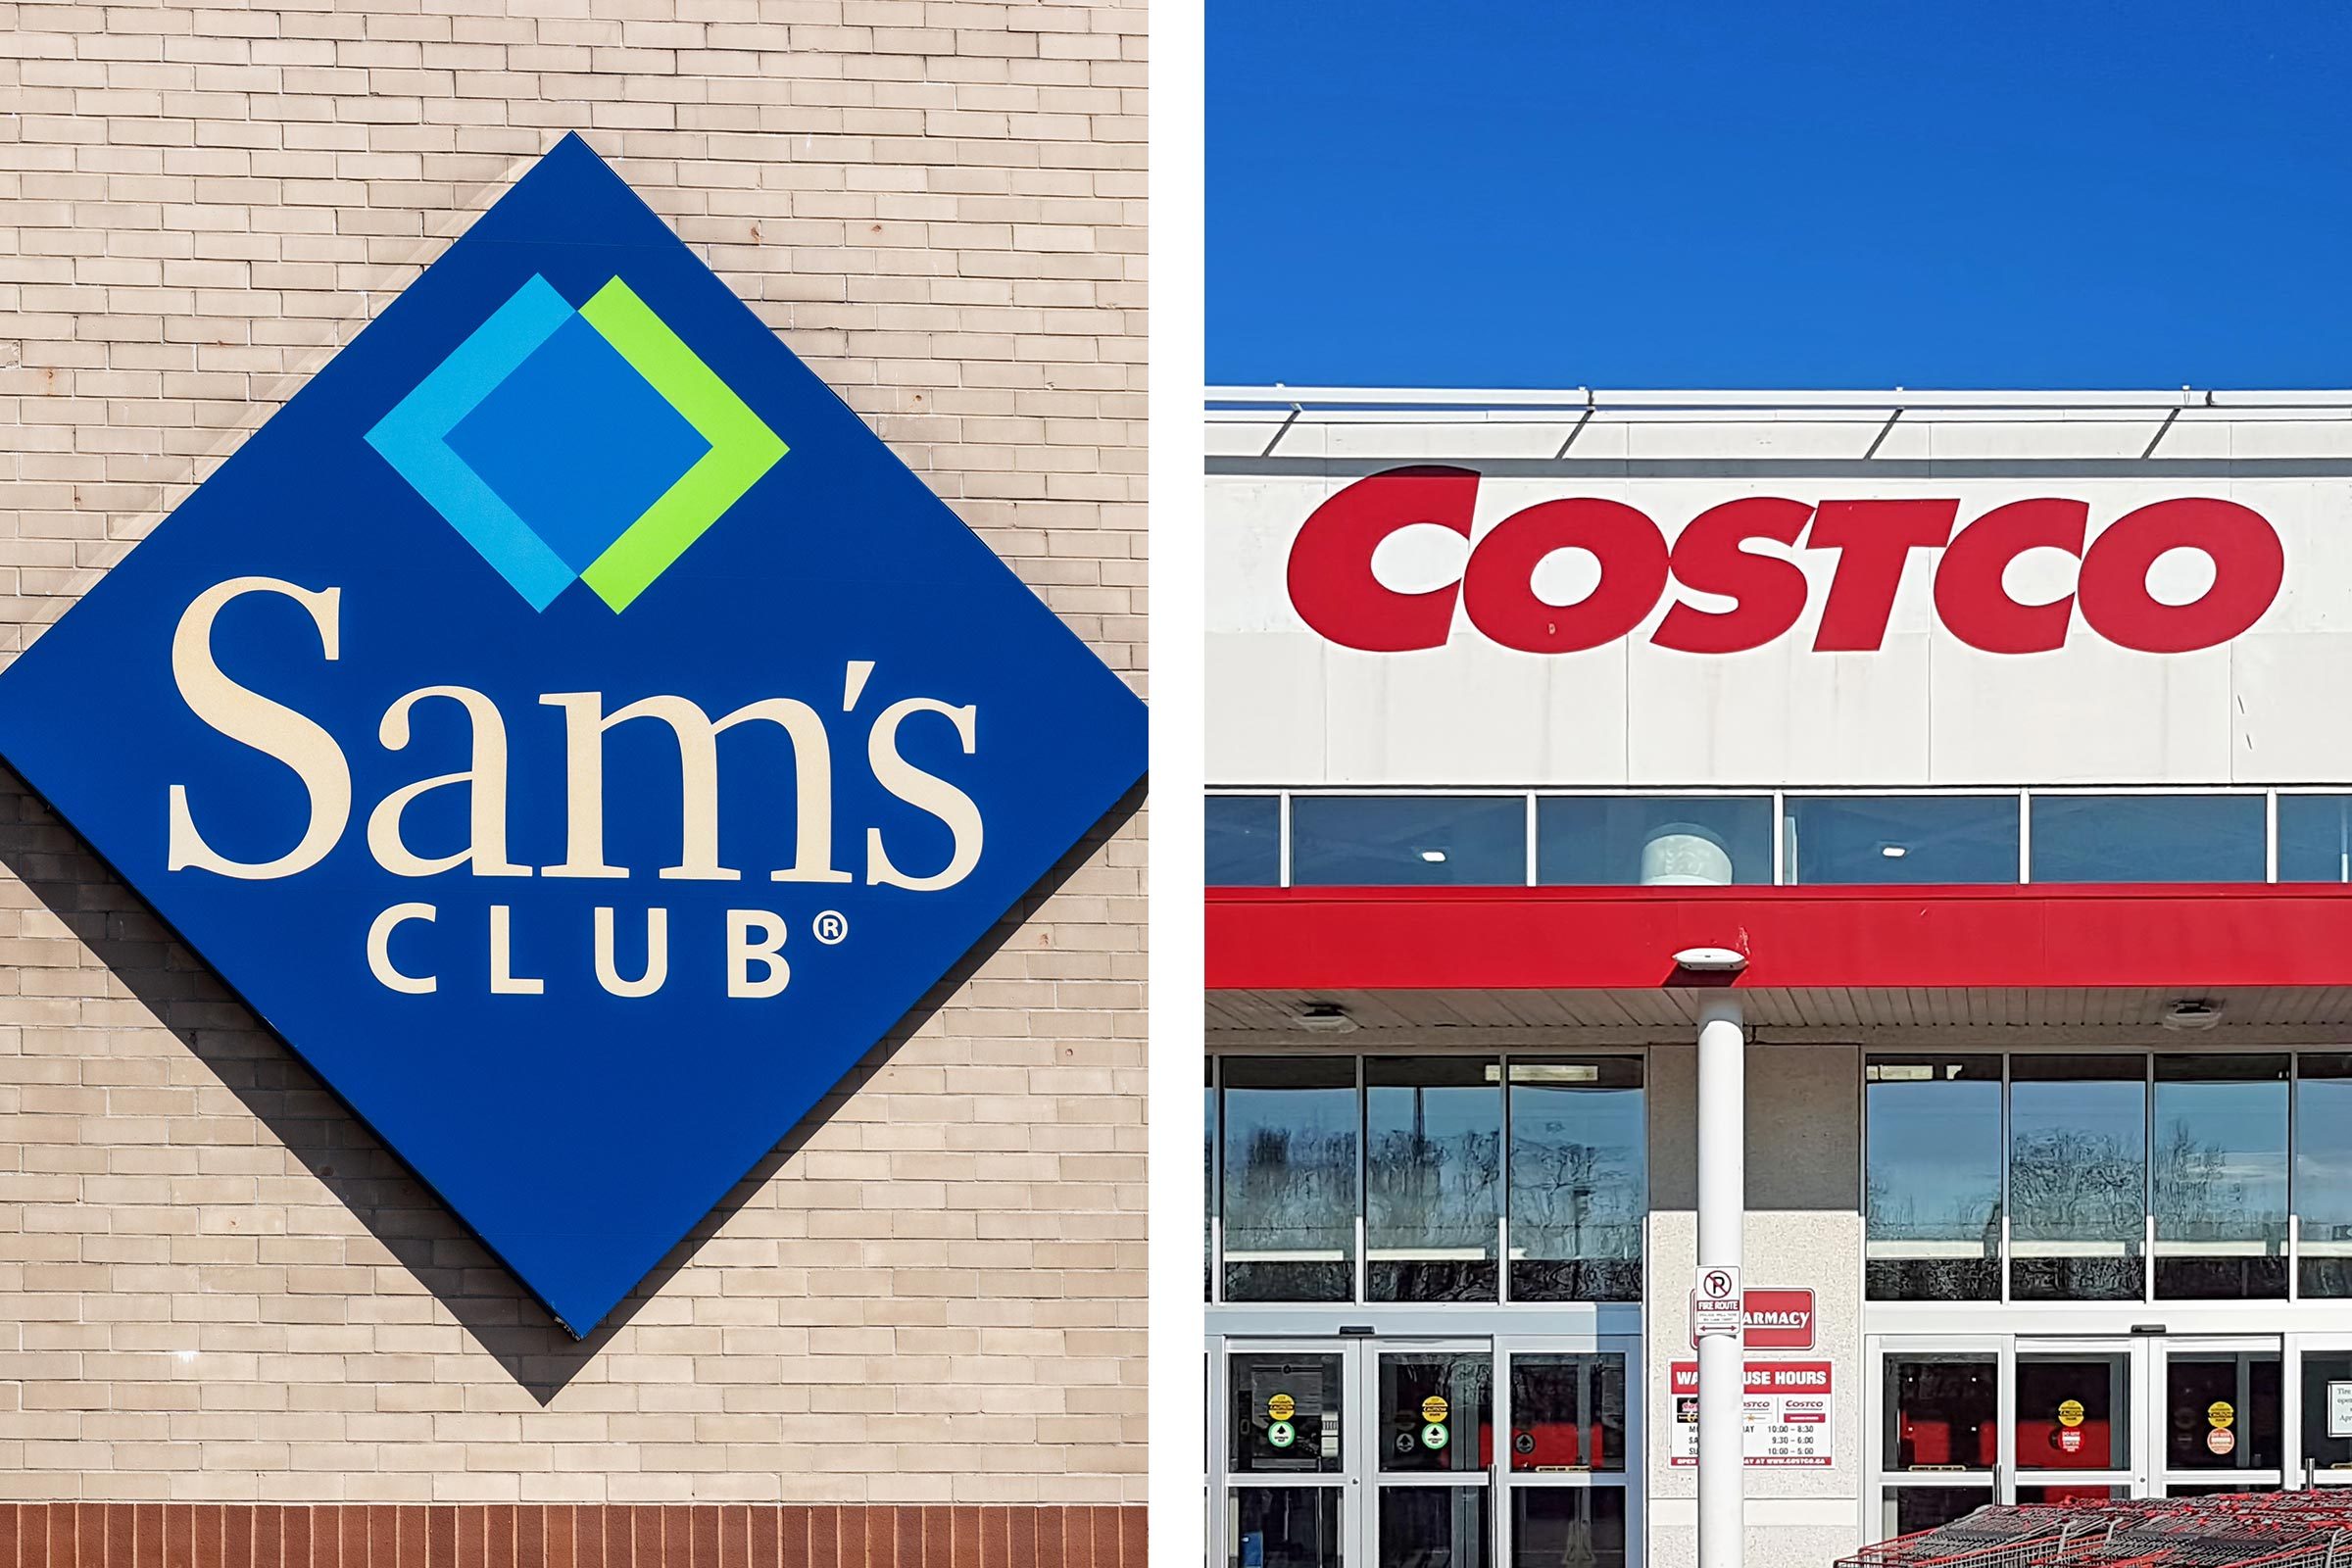 Sam's Club provides new measurement tool for retail media network